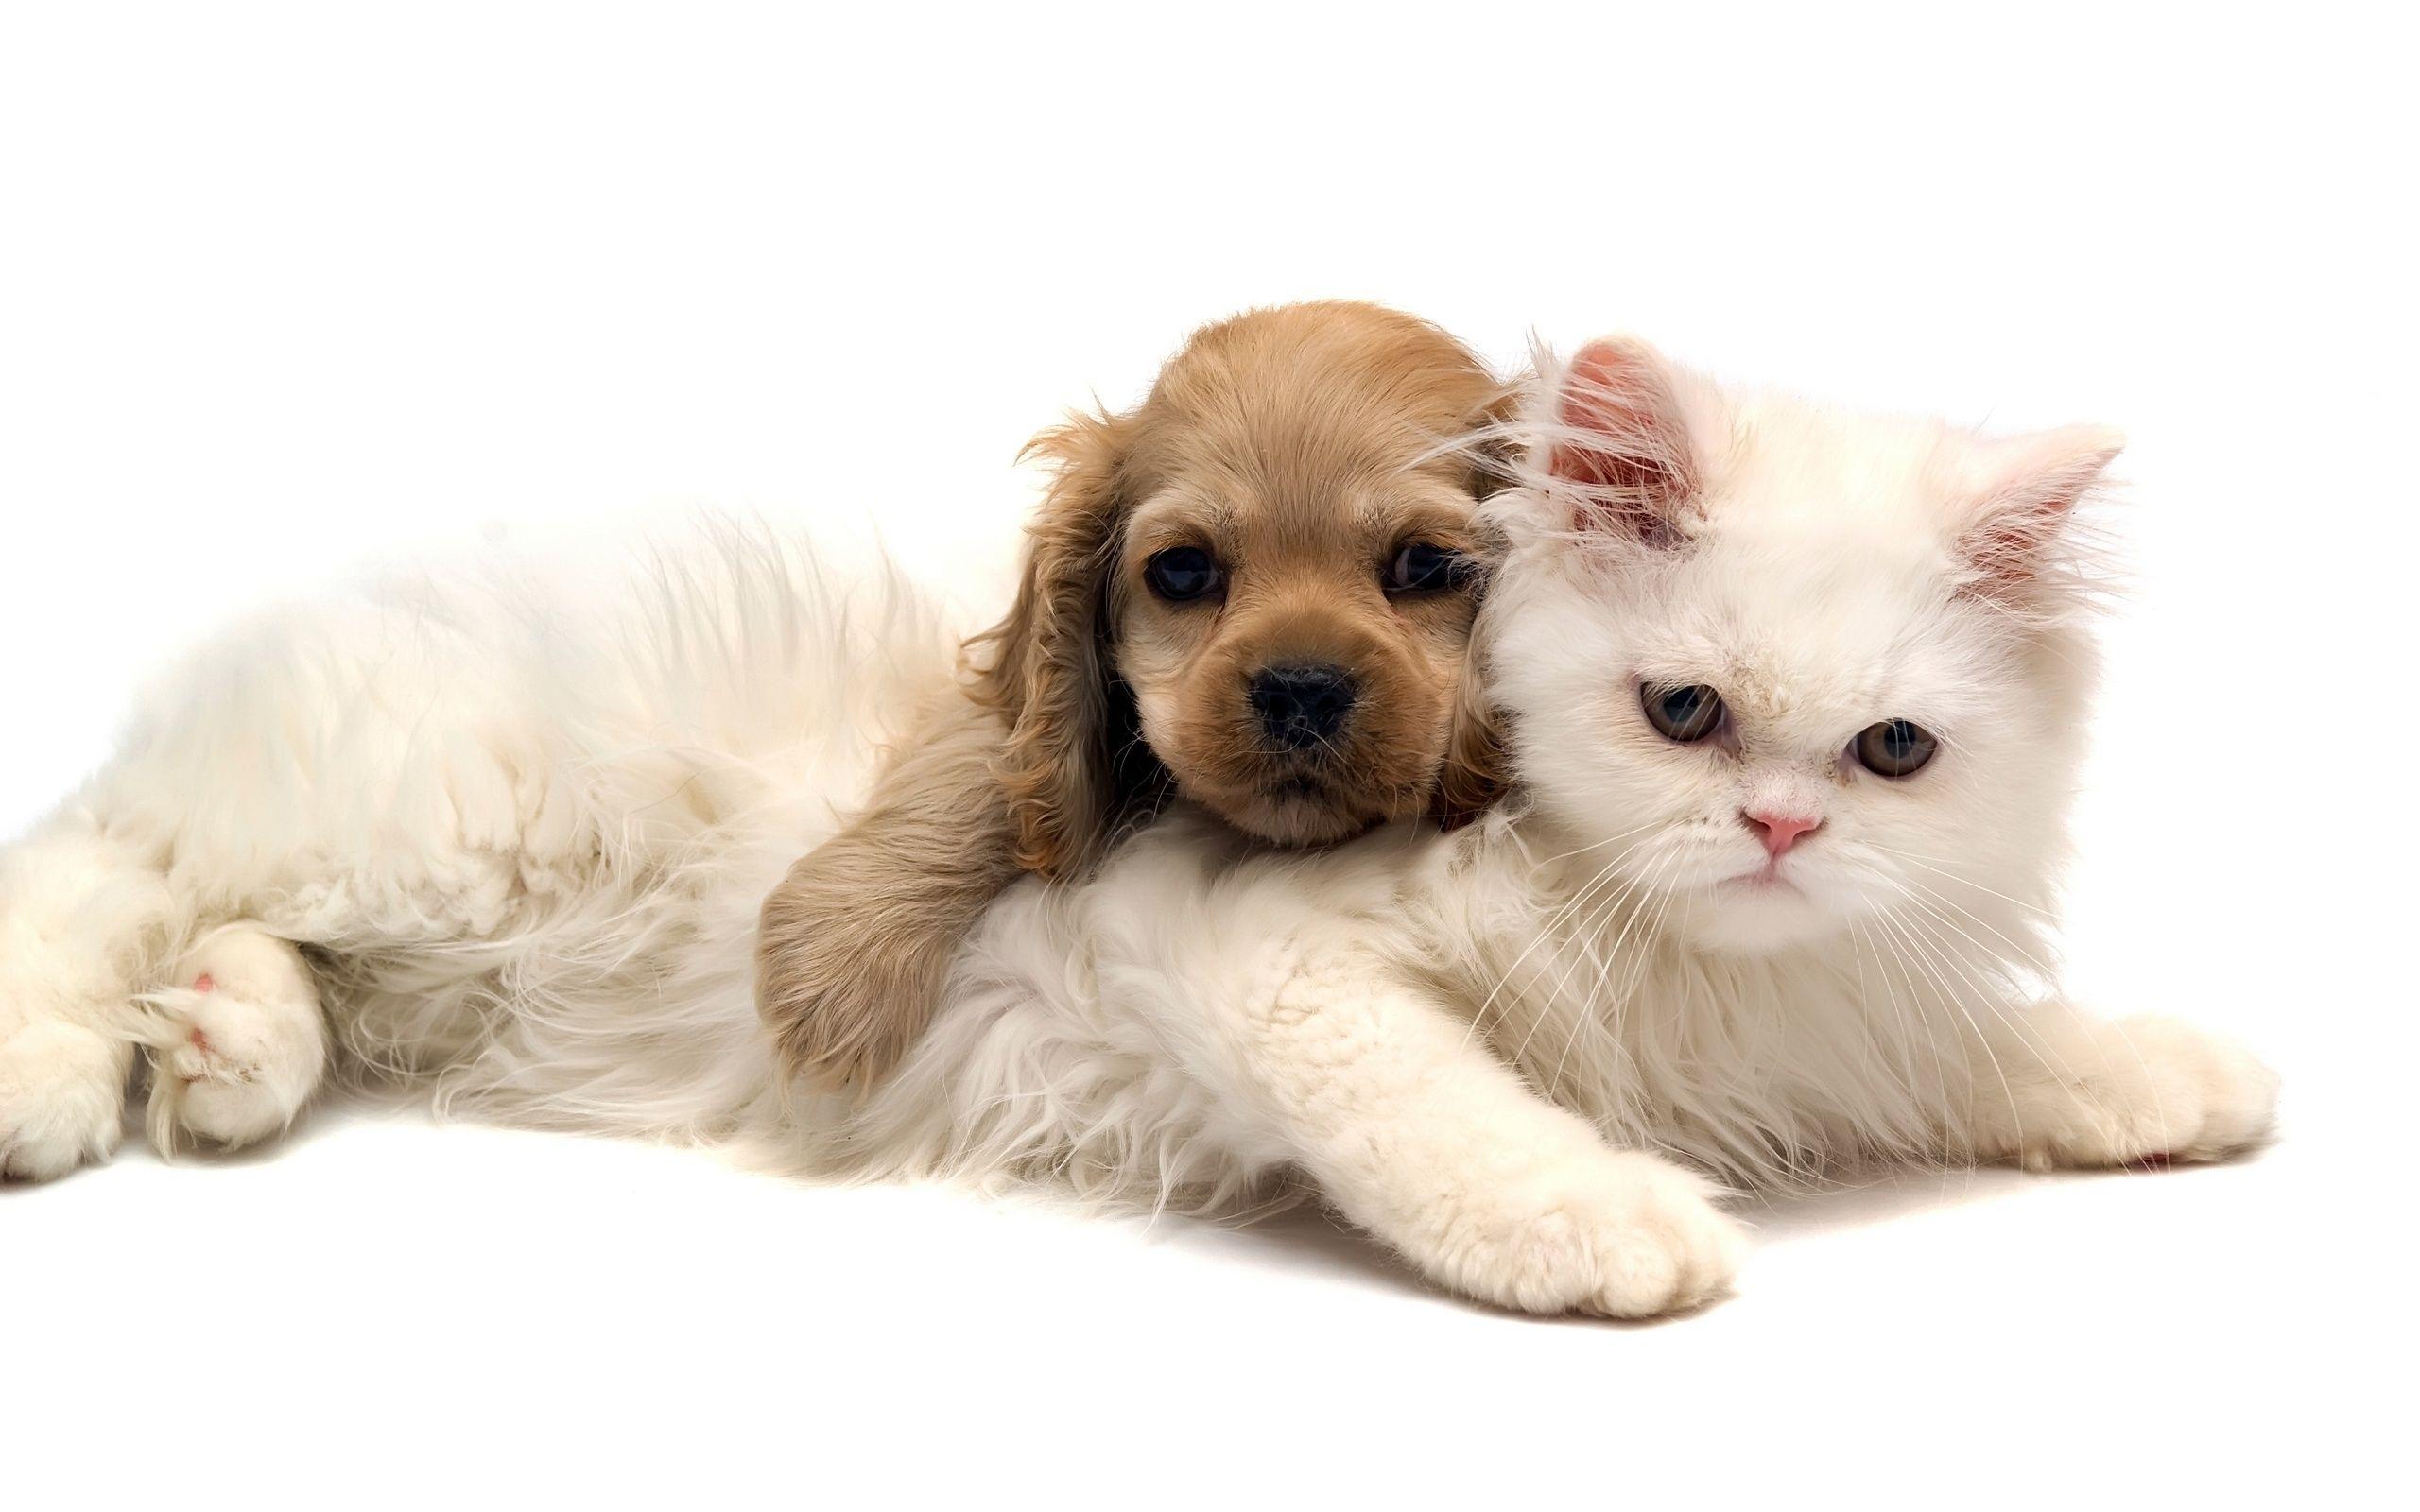 Baby Cats and Dogs Wallpapers - Top Free Baby Cats and Dogs ...